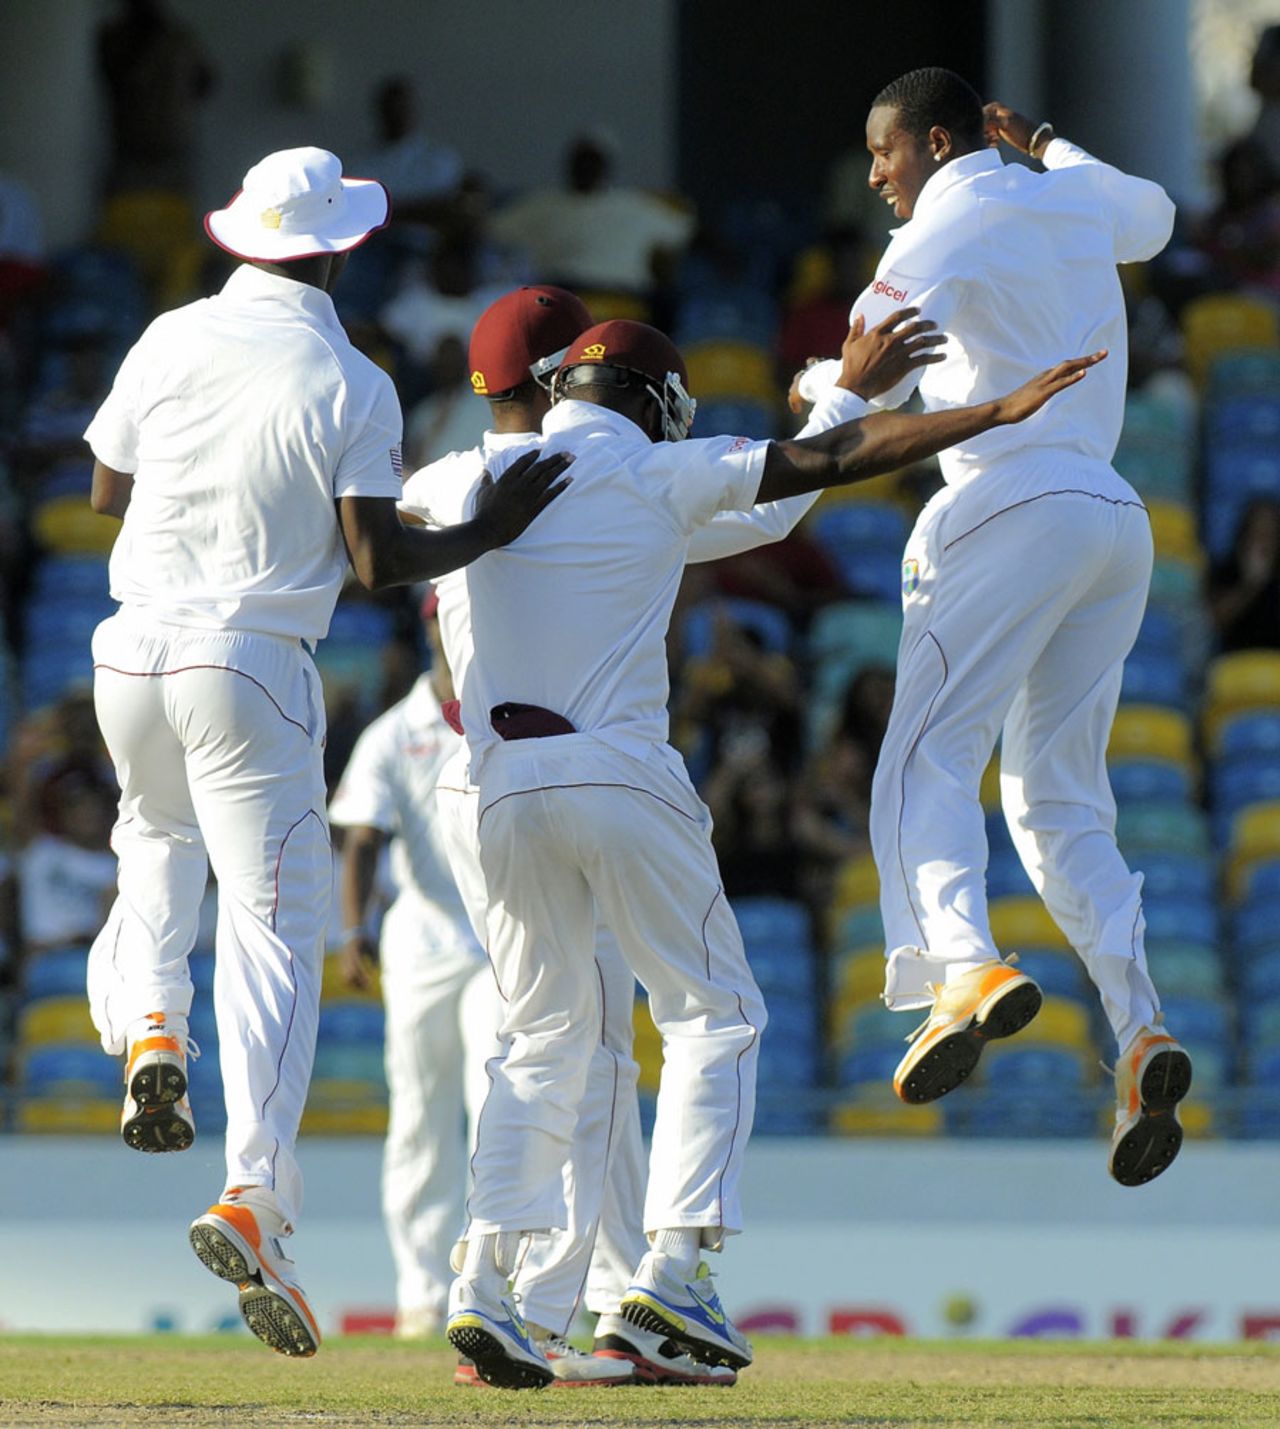 Shane Shillingford celebrates after taking a wicket, 1st Test, 2nd day, March 13, 2013